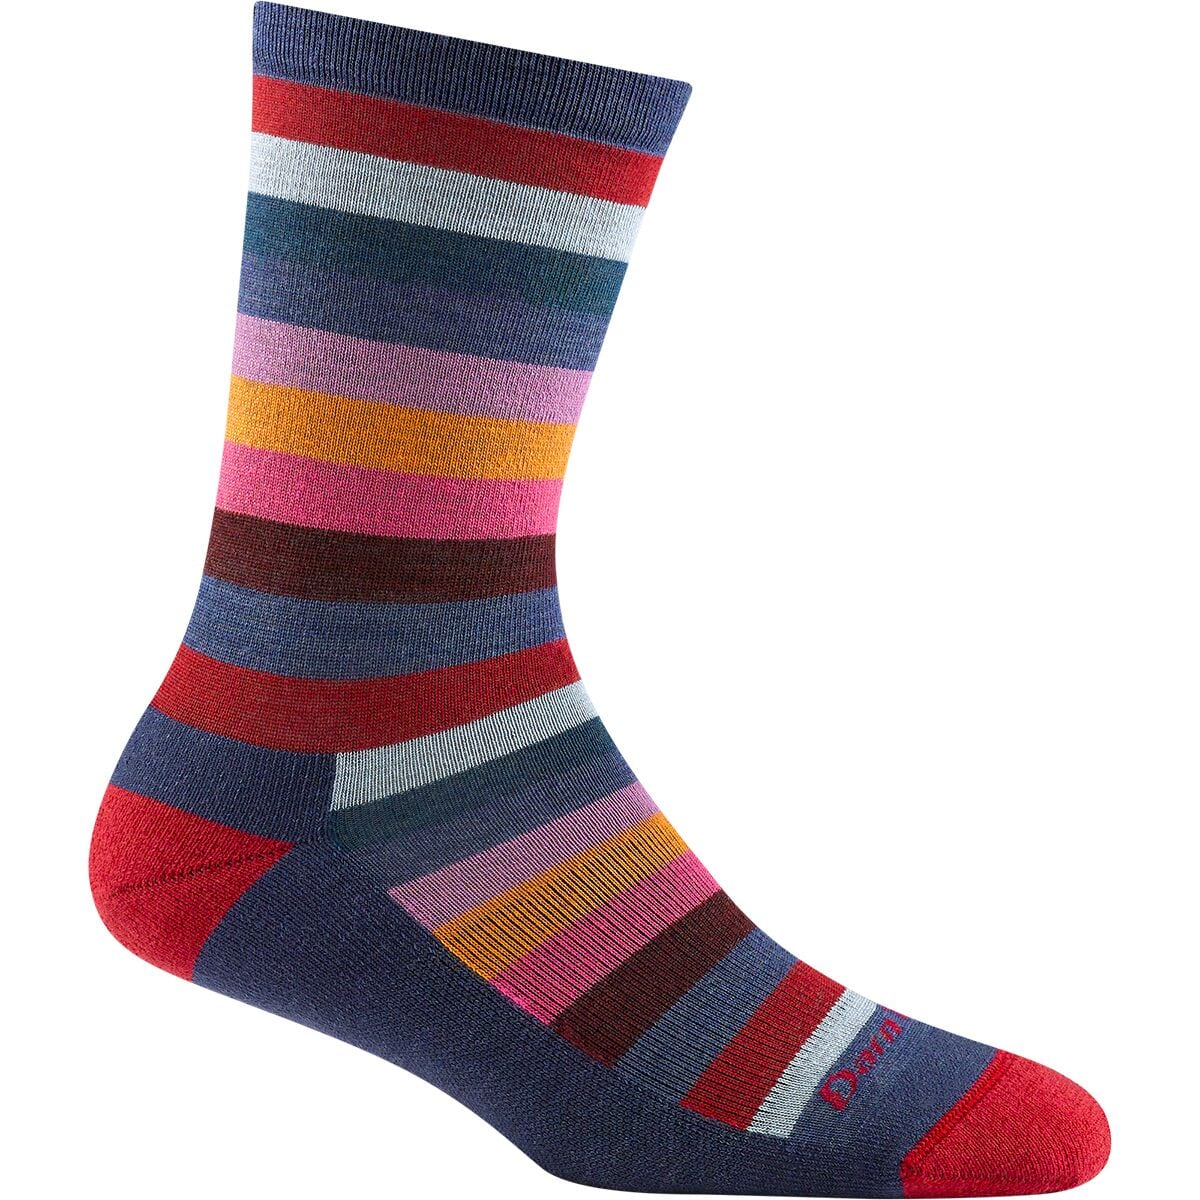 Women's Phat Witch Crew Lightweight Lifestyle Sock with Cushion